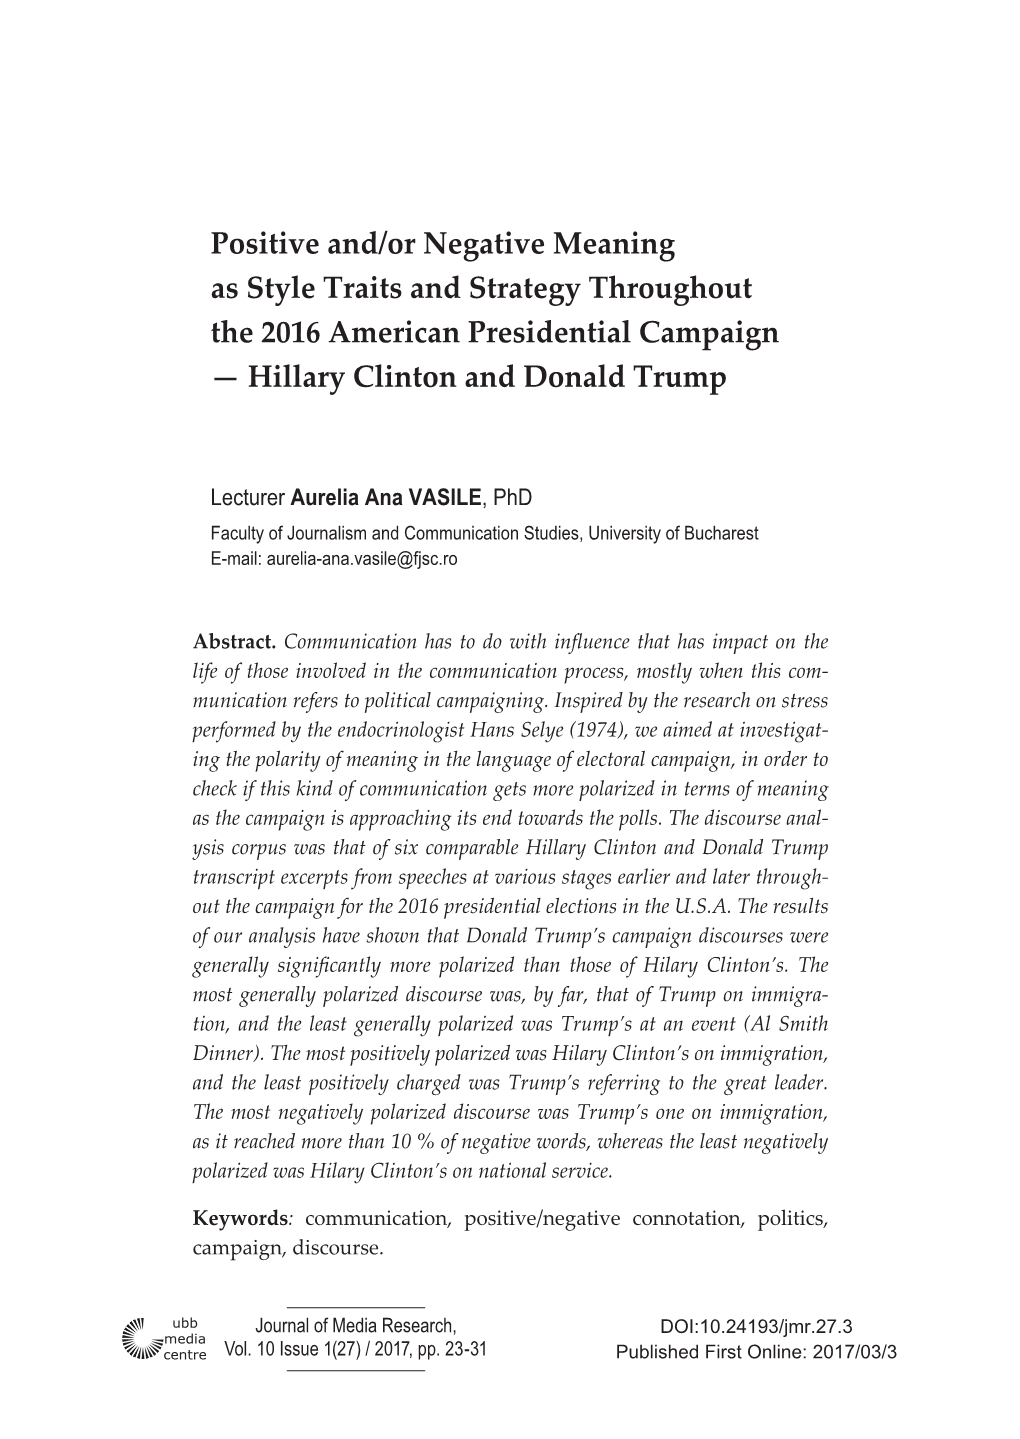 Positive And/Or Negative Meaning As Style Traits and Strategy Throughout the 2016 American Presidential Campaign — Hillary Clinton and Donald Trump